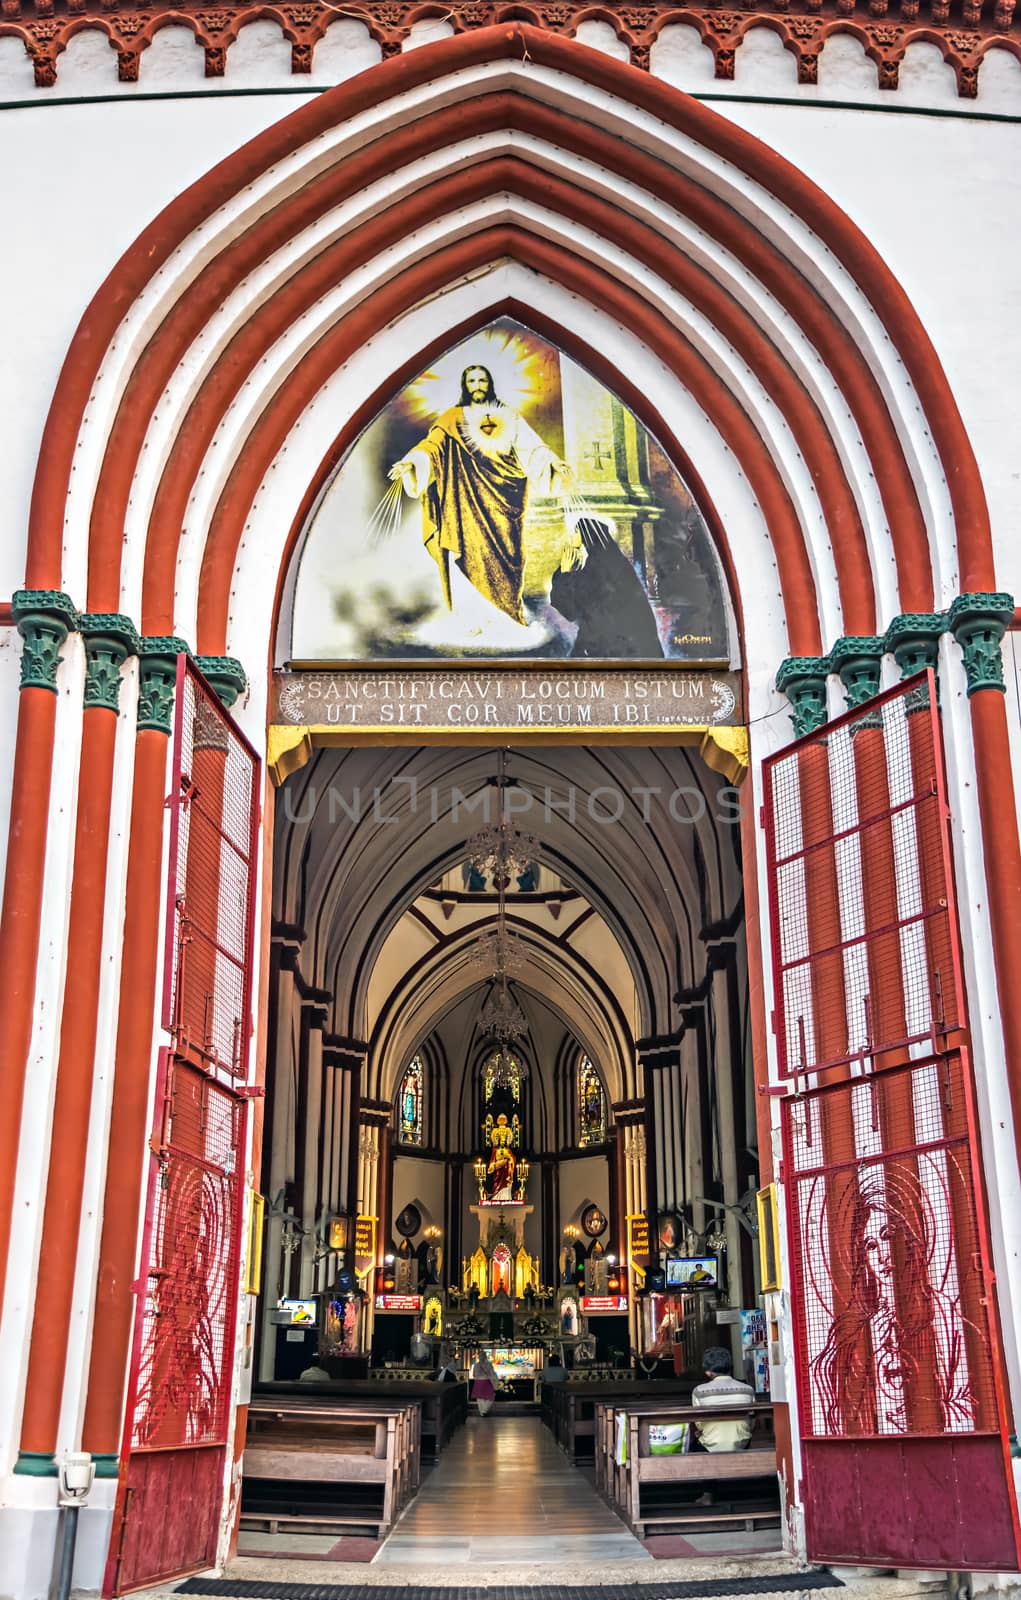 The entrance door of Basilica of the Sacred Heart of Jesus situated on the south boulevard of Pondicherry in Puducherry, India by lalam